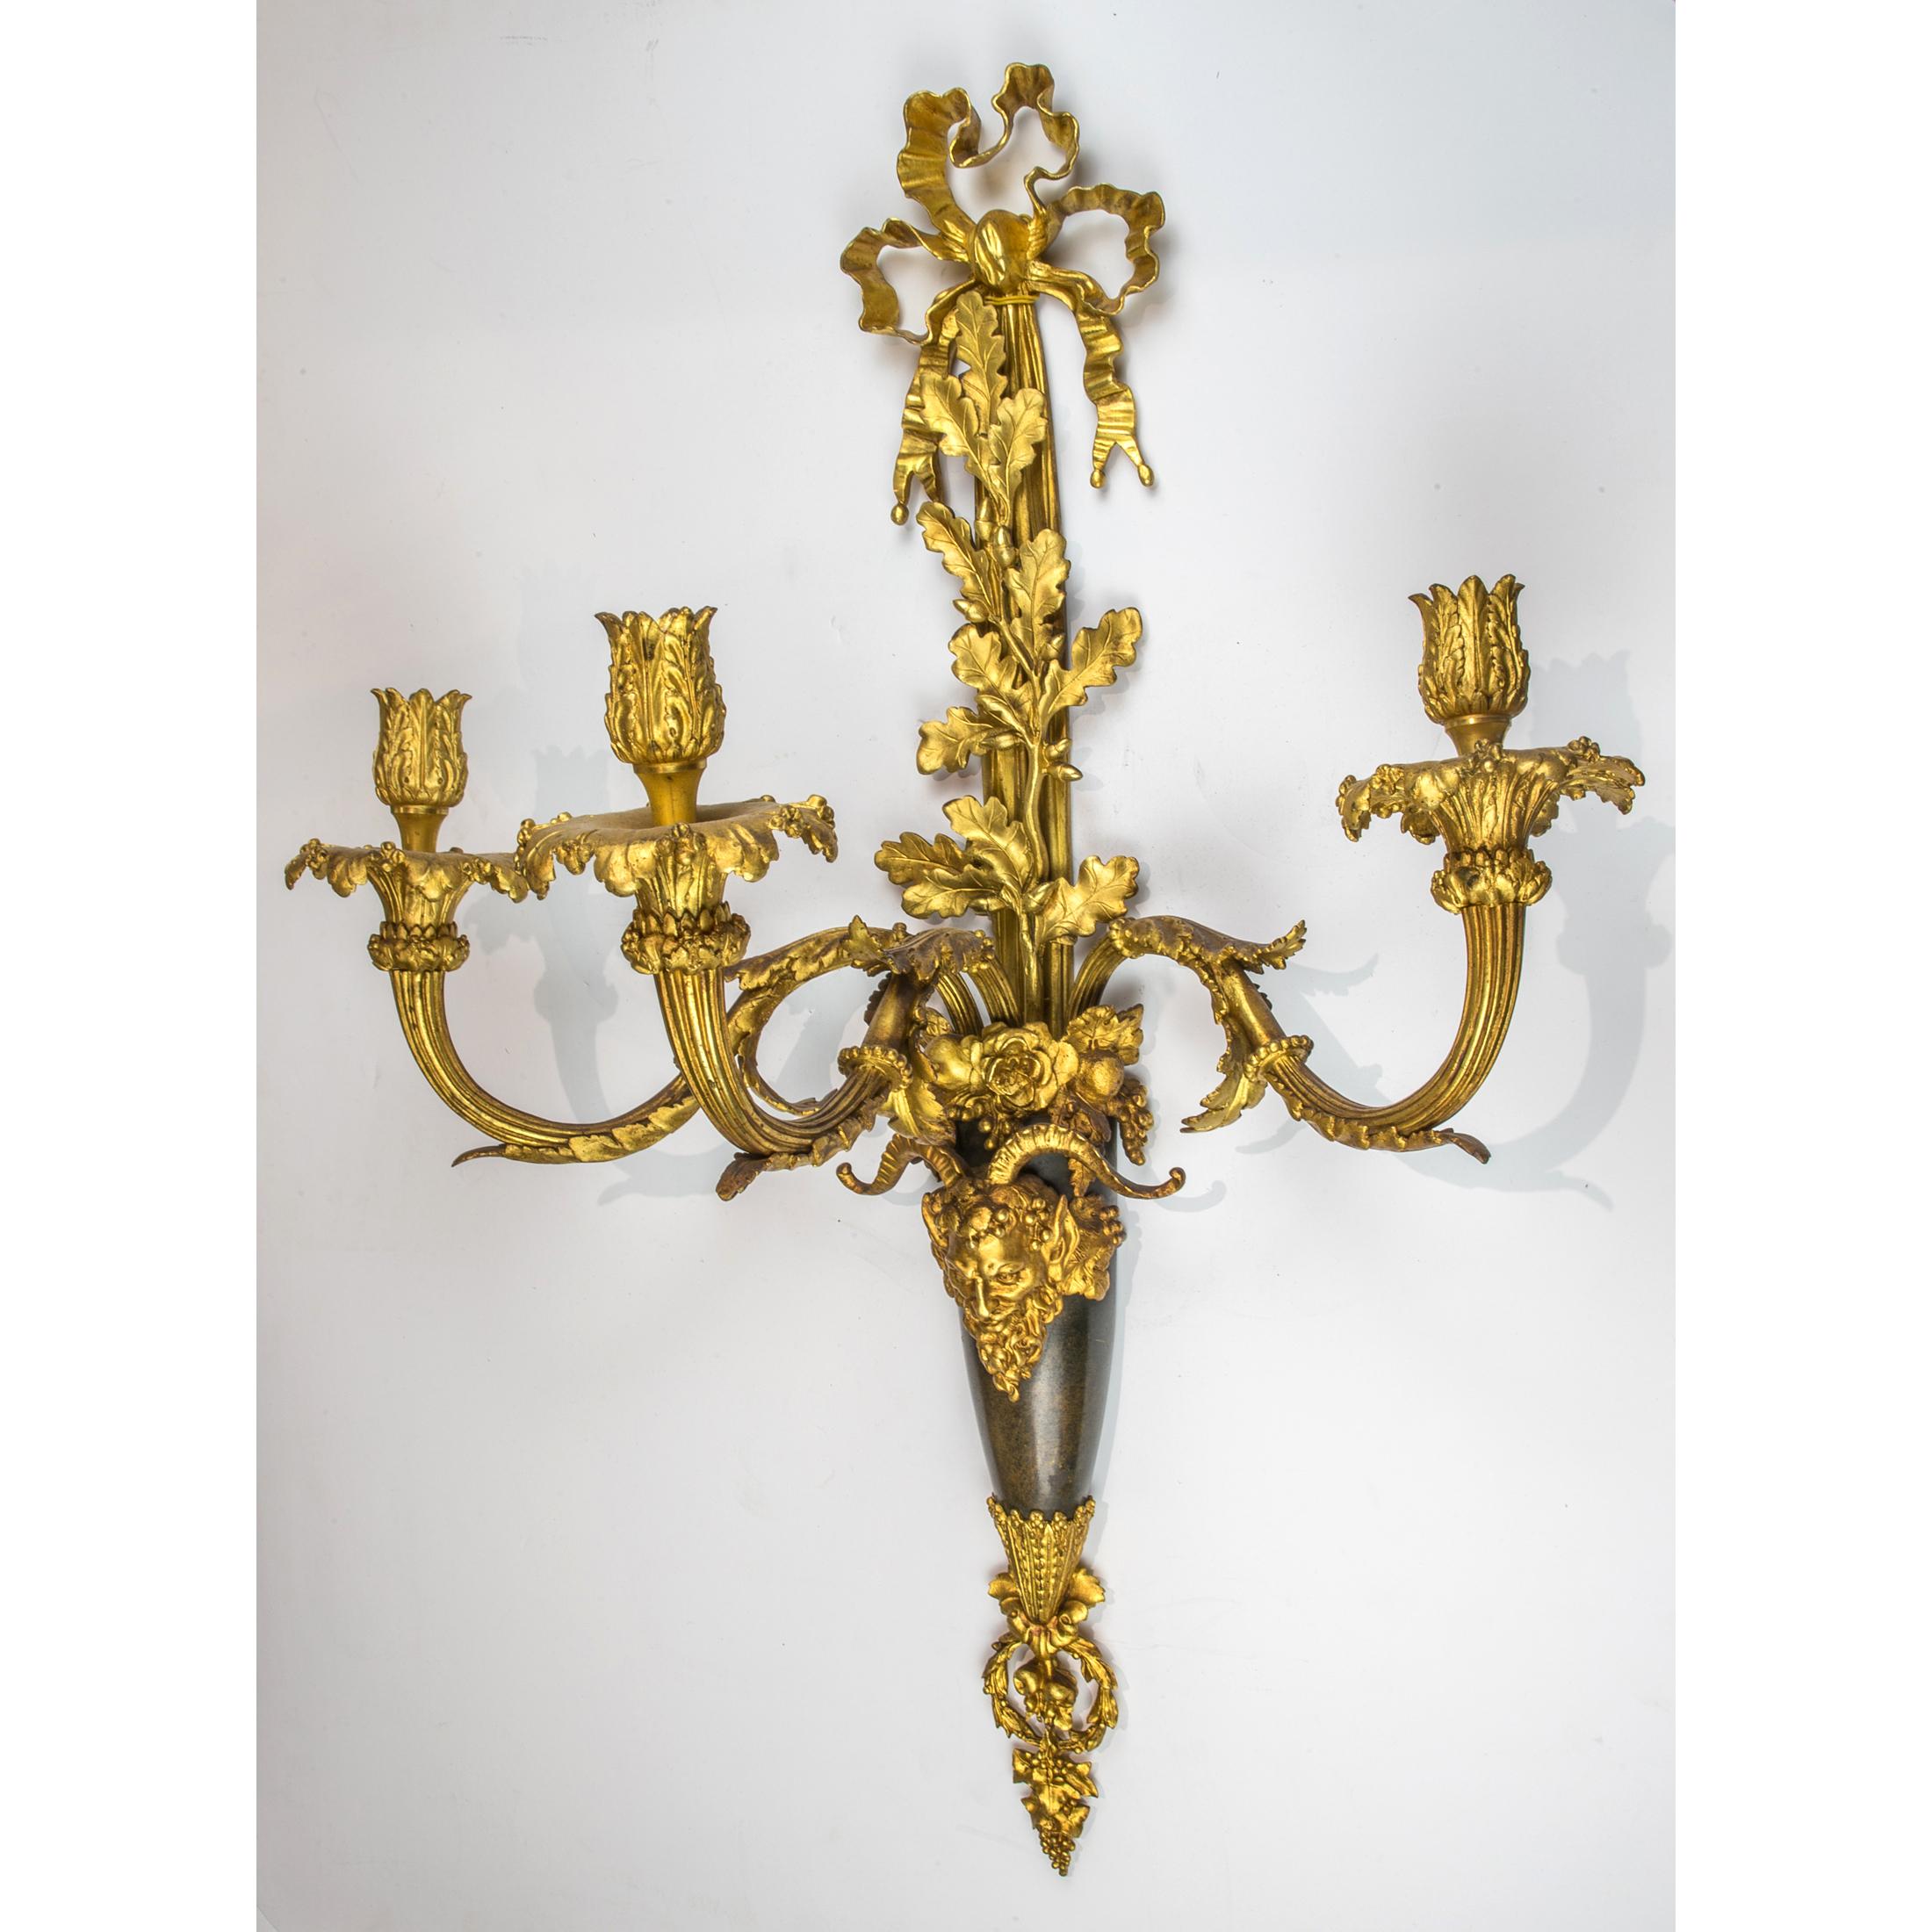 Exquisite quality pair of Louis XVI style three-light gilt and patinated bronze wall sconces. The backplate cast as a faisceau centered by a bacchiwc mask and issuing three scrolled acanthus and vine cast branches. 

Origin: French
Date: Late